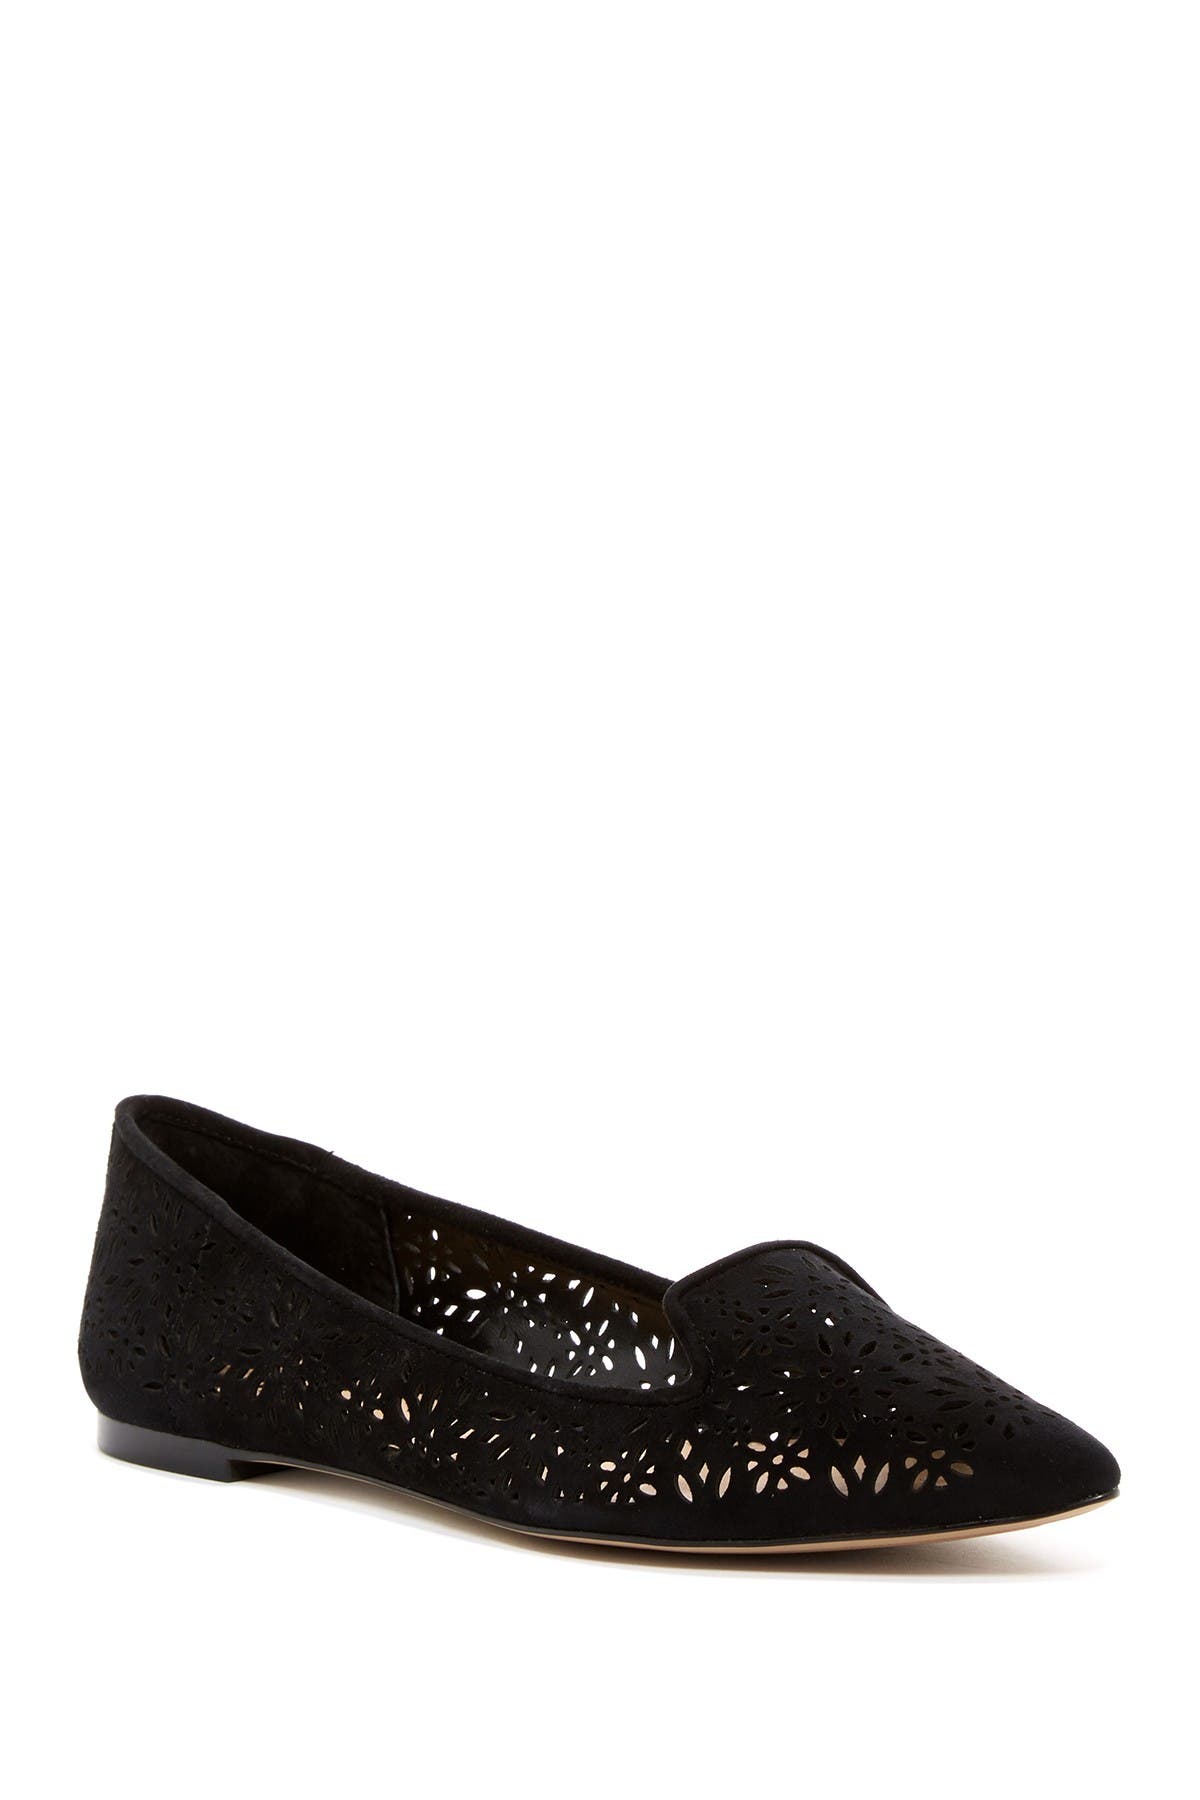 vince camuto flats nordstrom